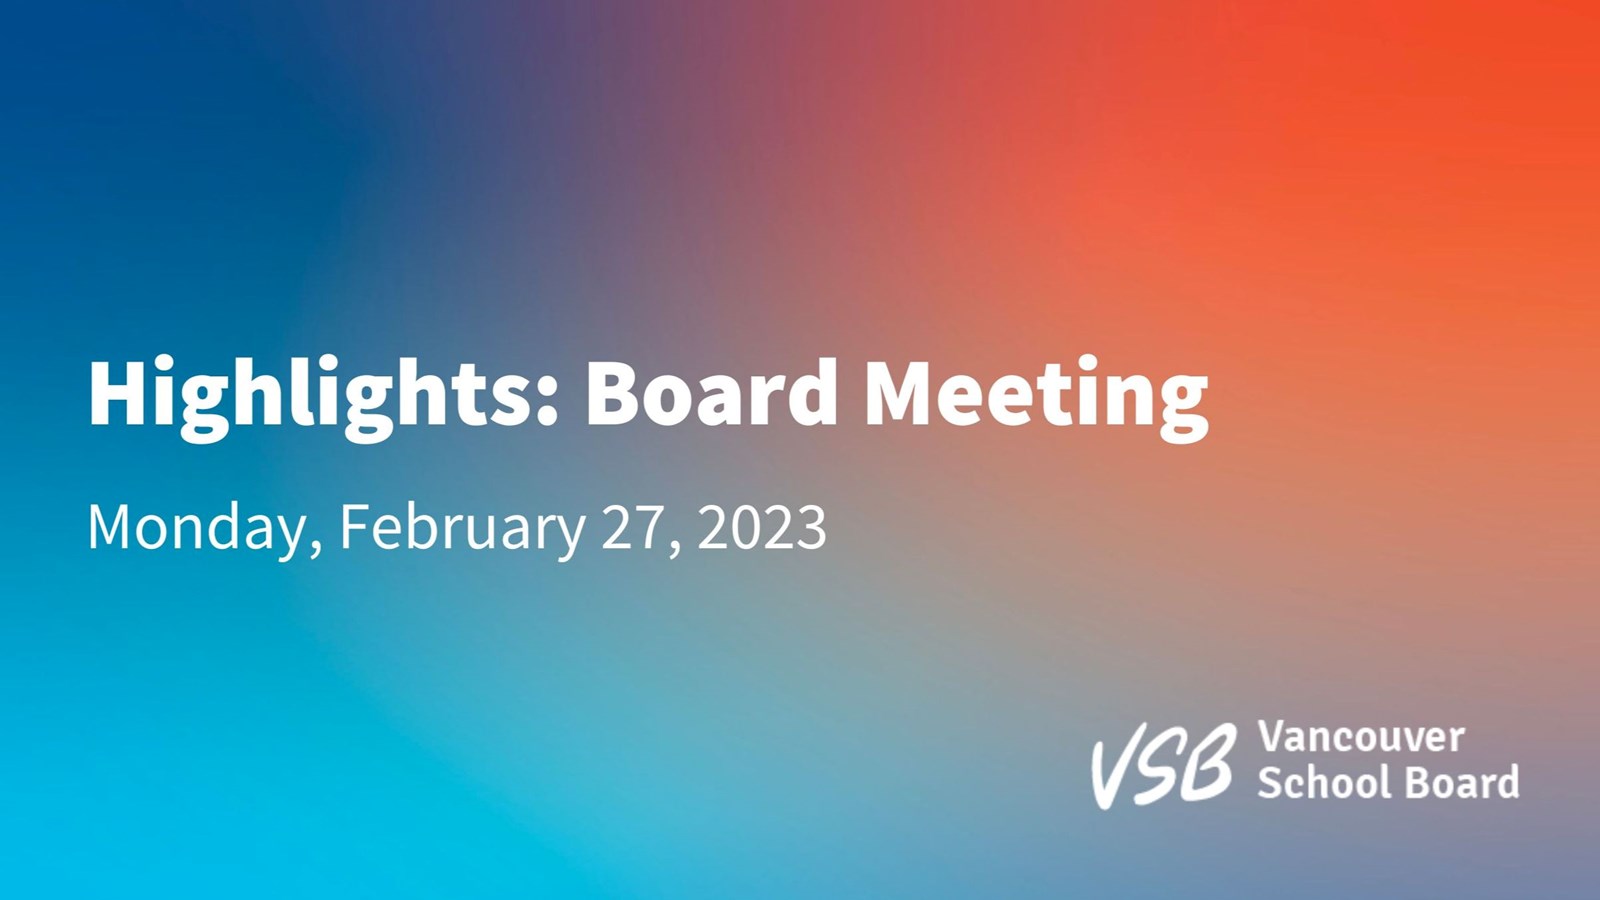 Highlights: Board Meeting - Monday, February 27, 2023